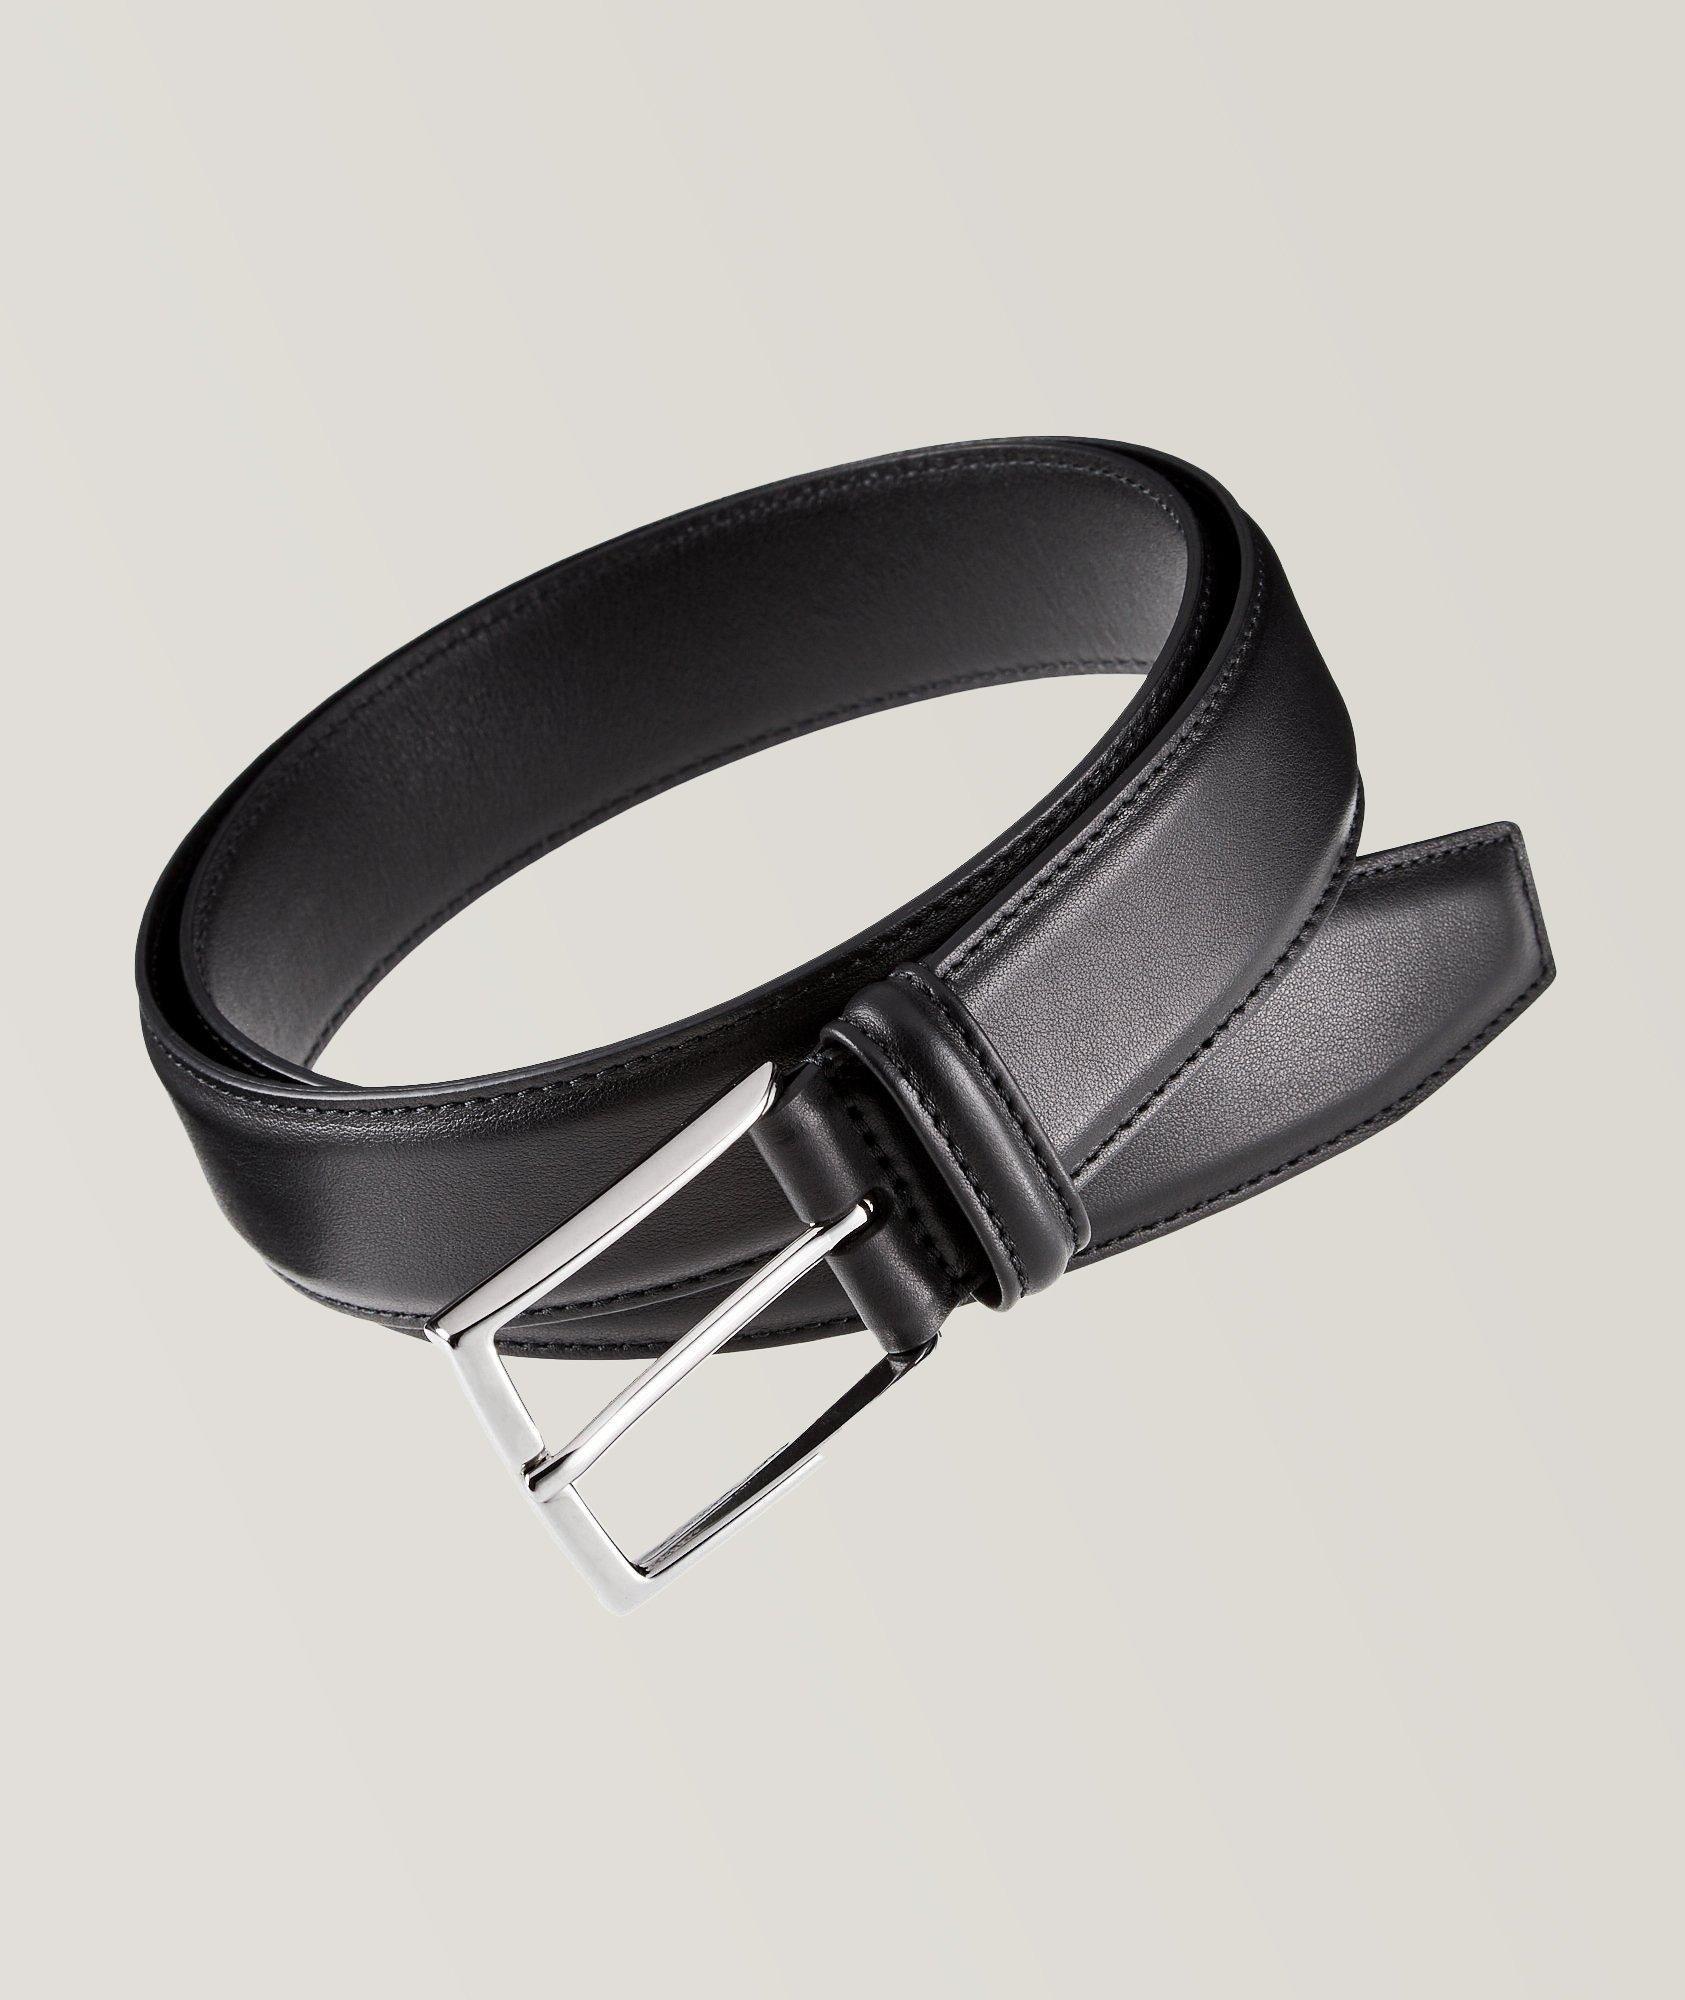 Leather Square Pin-Buckle Belt image 0